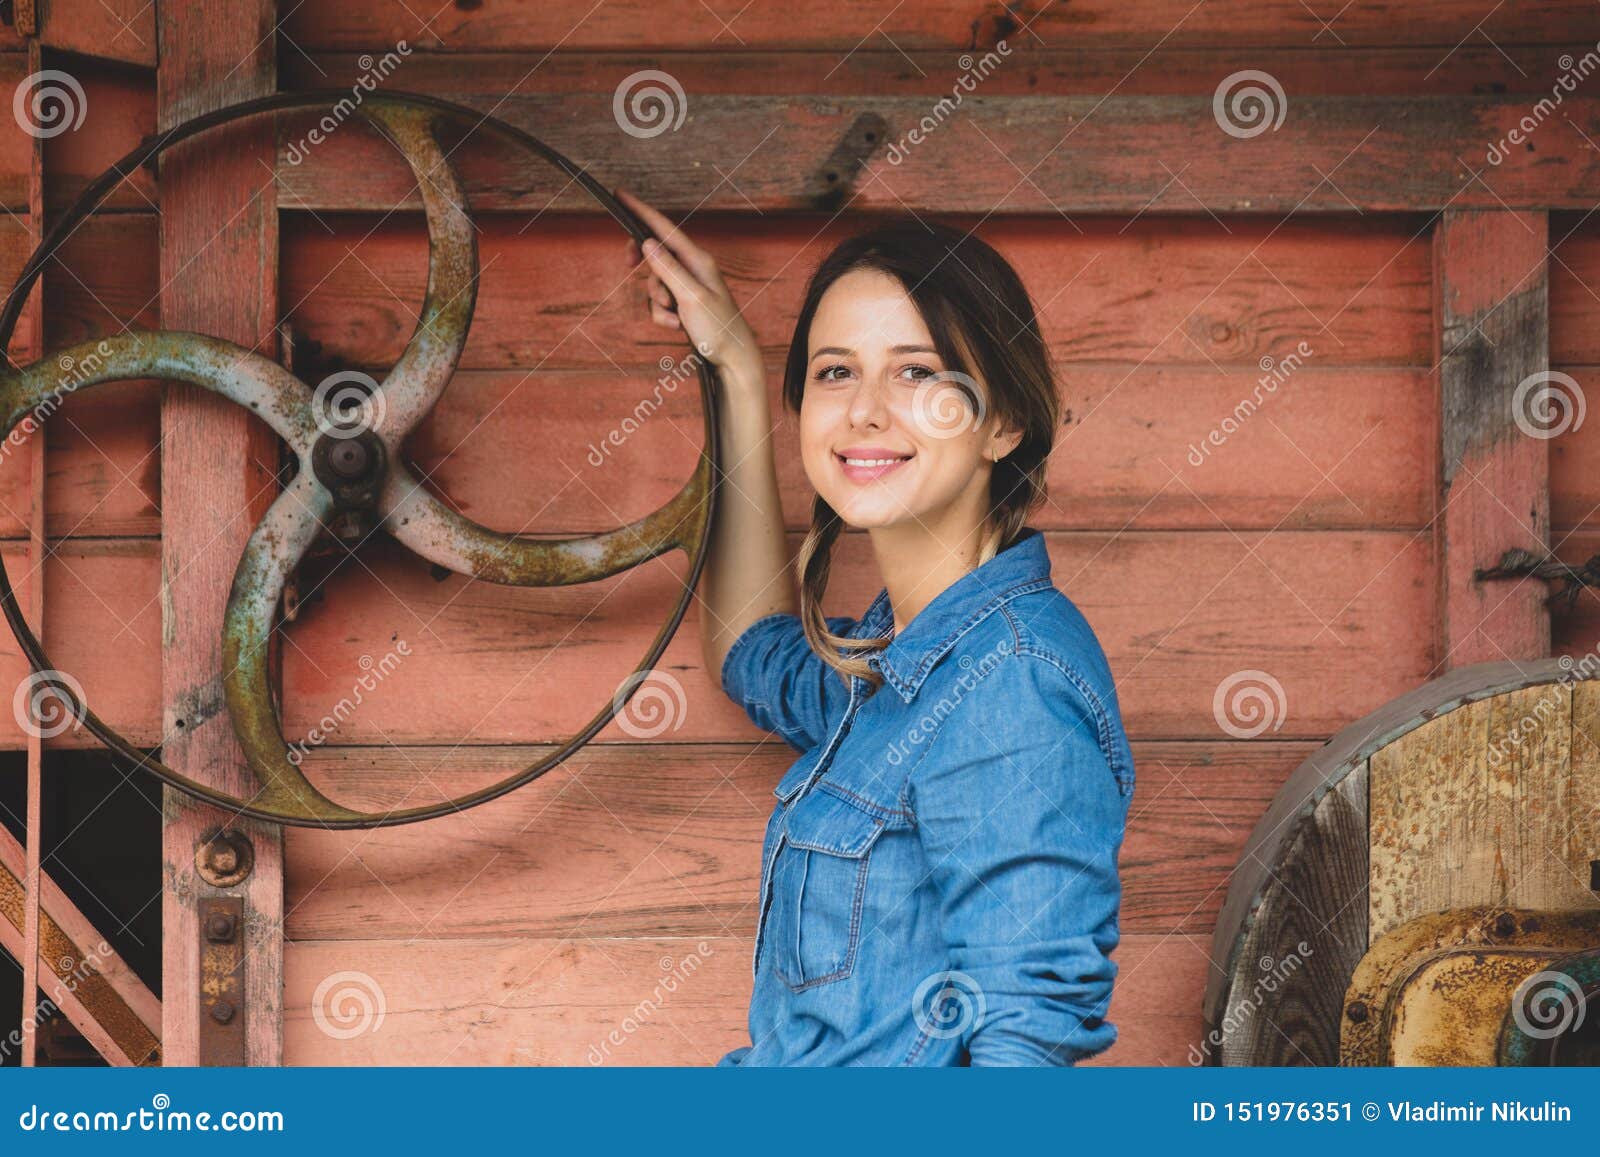 young woman near wheel of an old wooden combine harvester of xix century